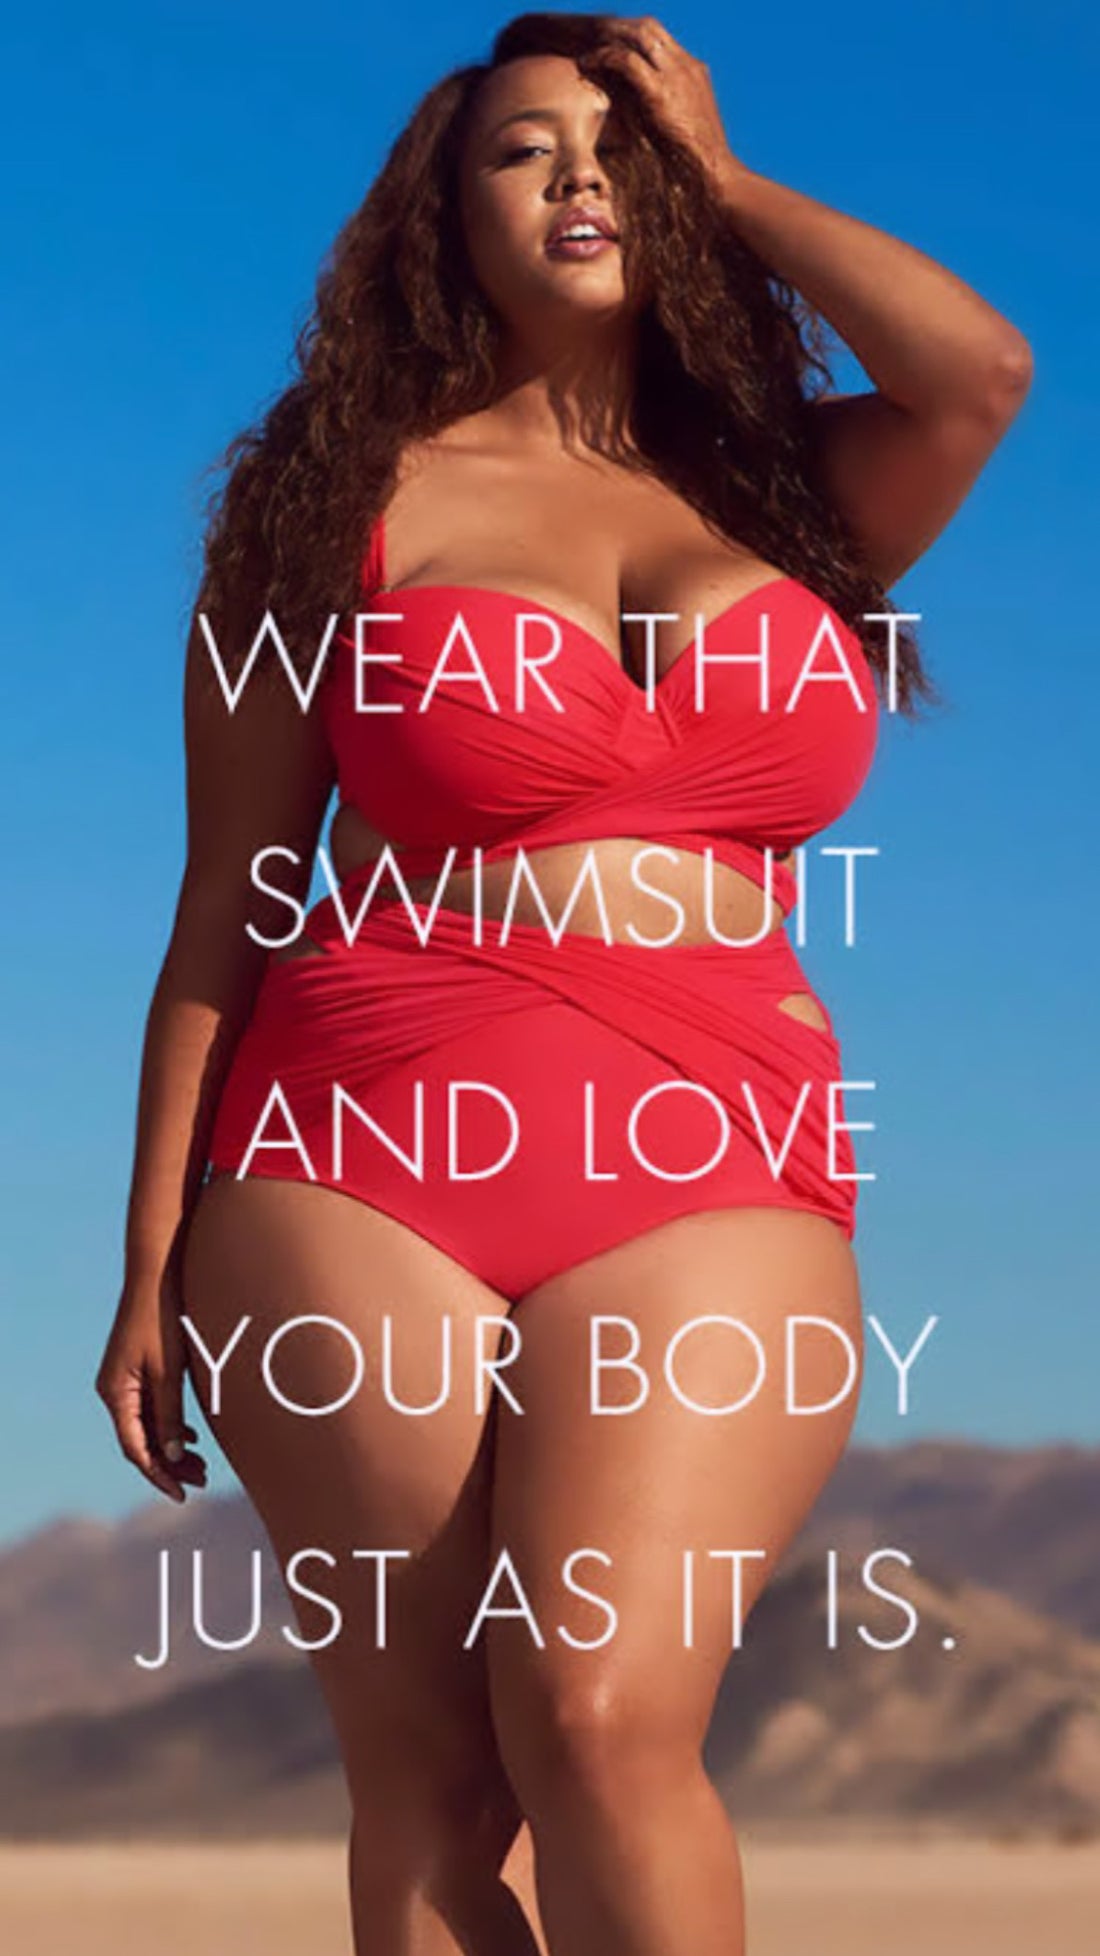 How to Choose Swimwear for Your Body Type